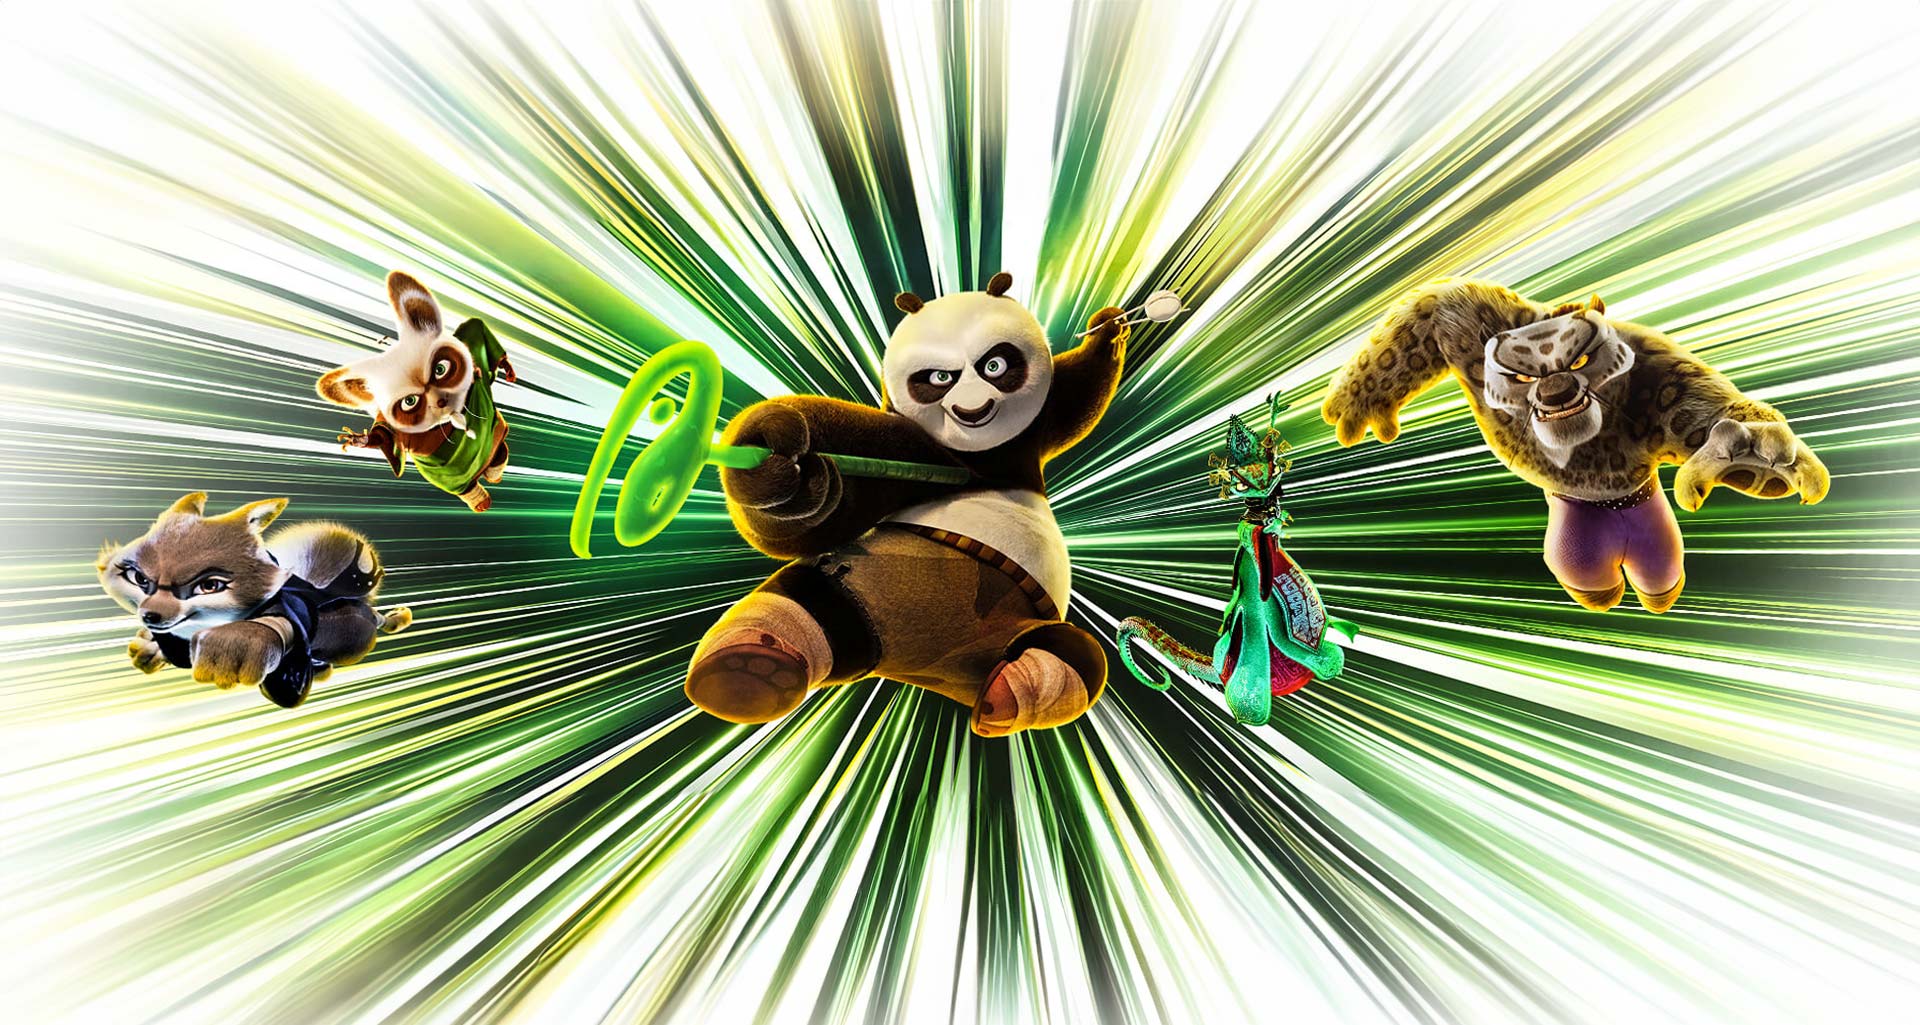 ‘Kung Fu Panda 4’ is a Wonderful Addition to Po’s Legacy as the Dragon Warrior – Review